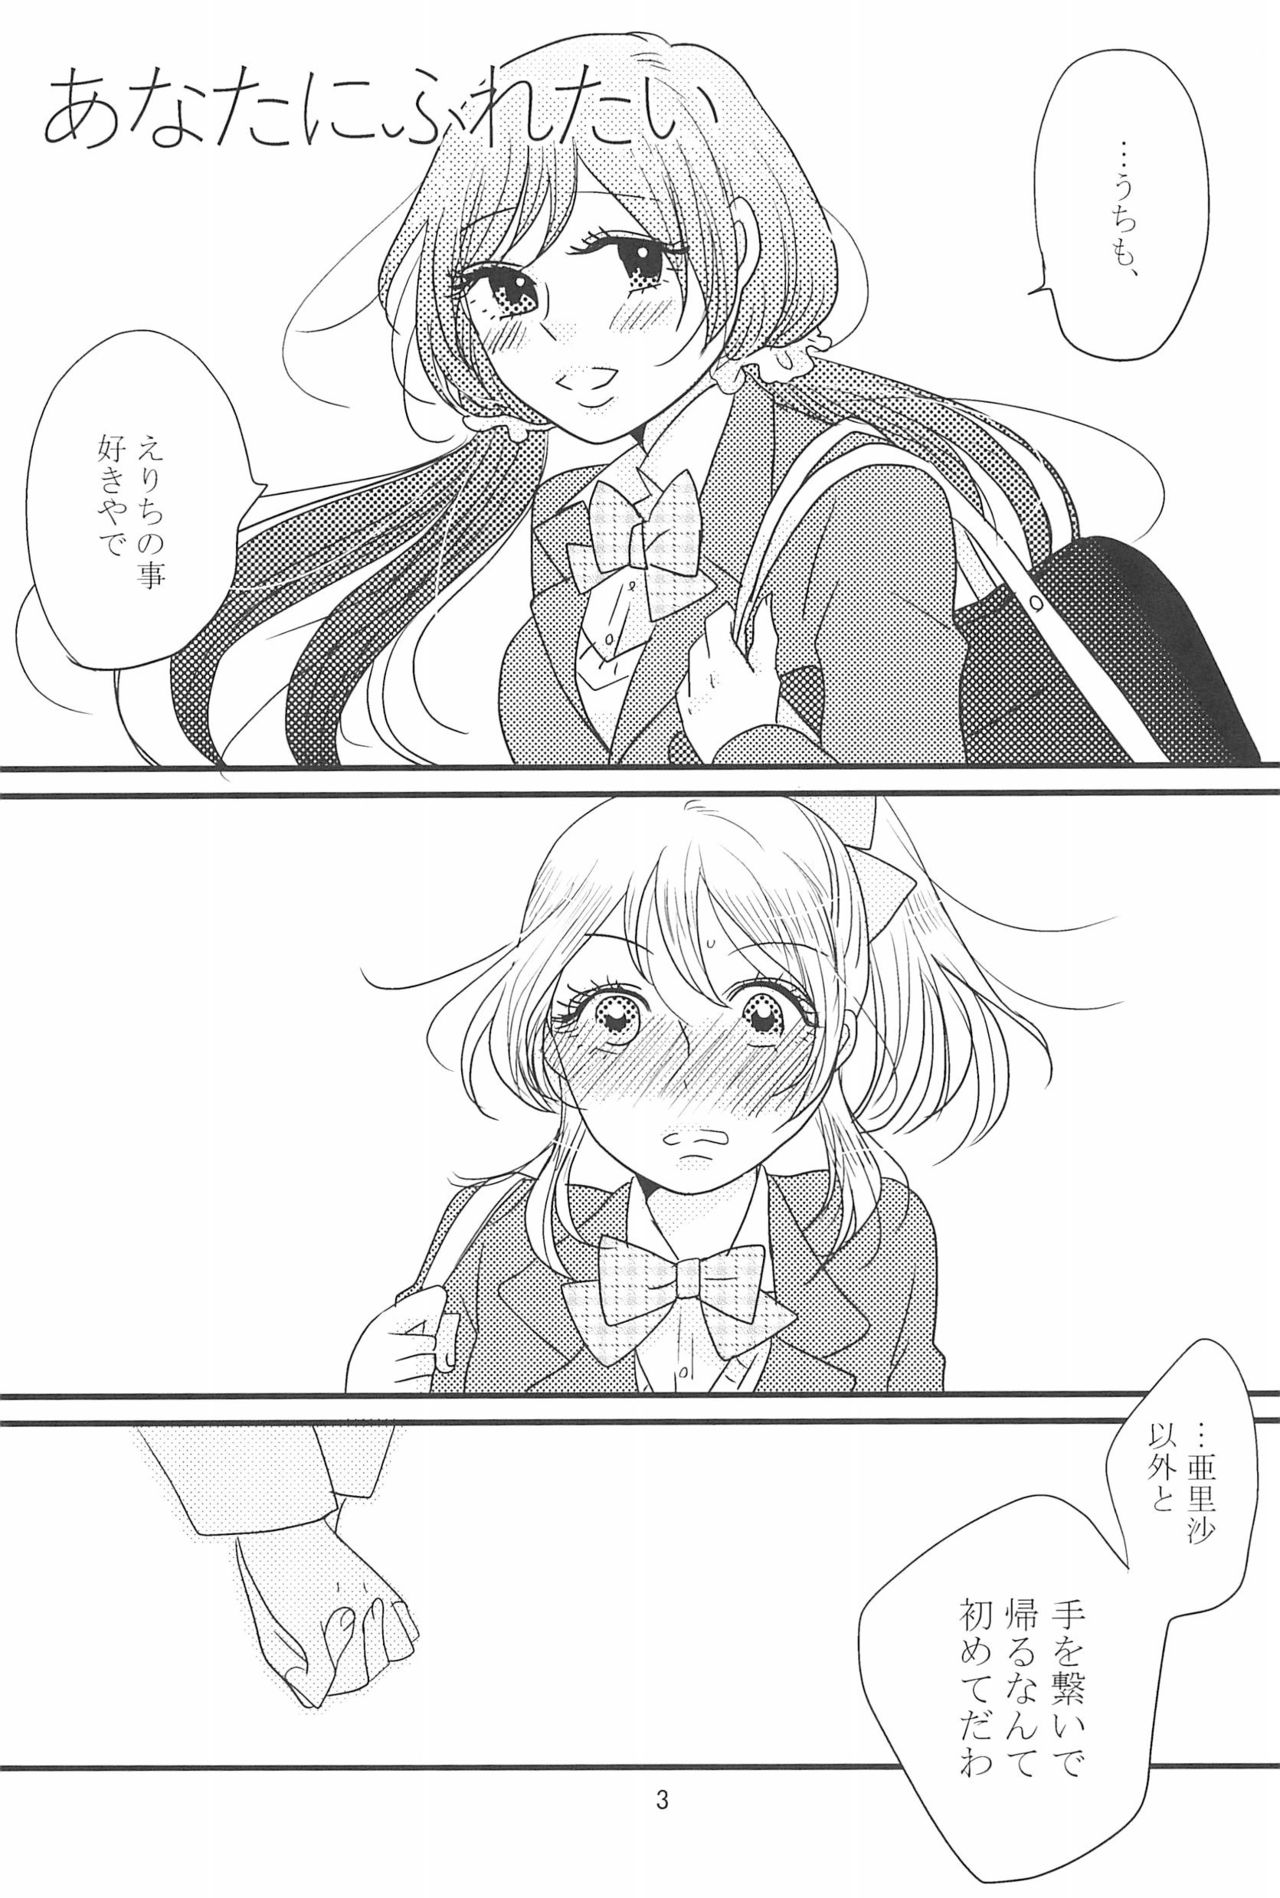 (C90) [BK*N2 (Mikawa Miso)] HAPPY GO LUCKY DAYS (Love Live!) page 7 full